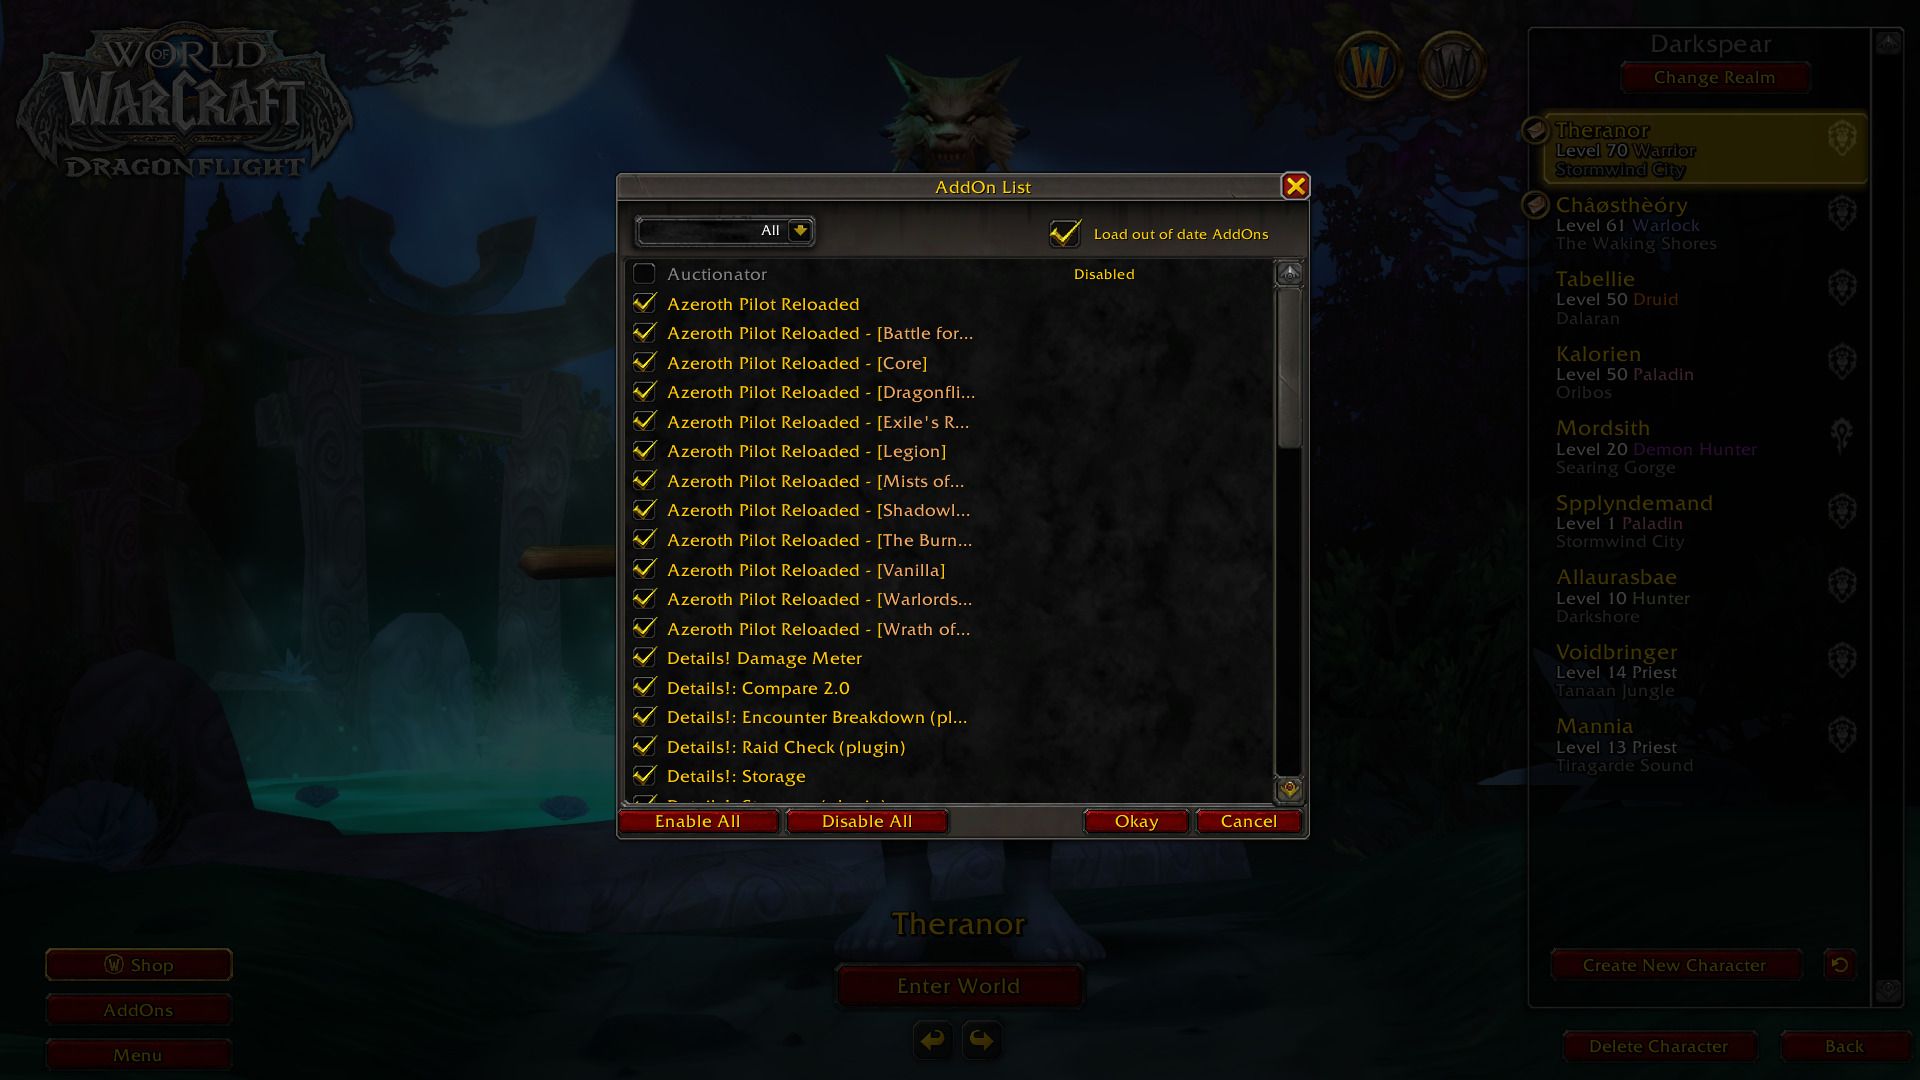 Multiple addons selected on the World of Warcraft Launch Screen